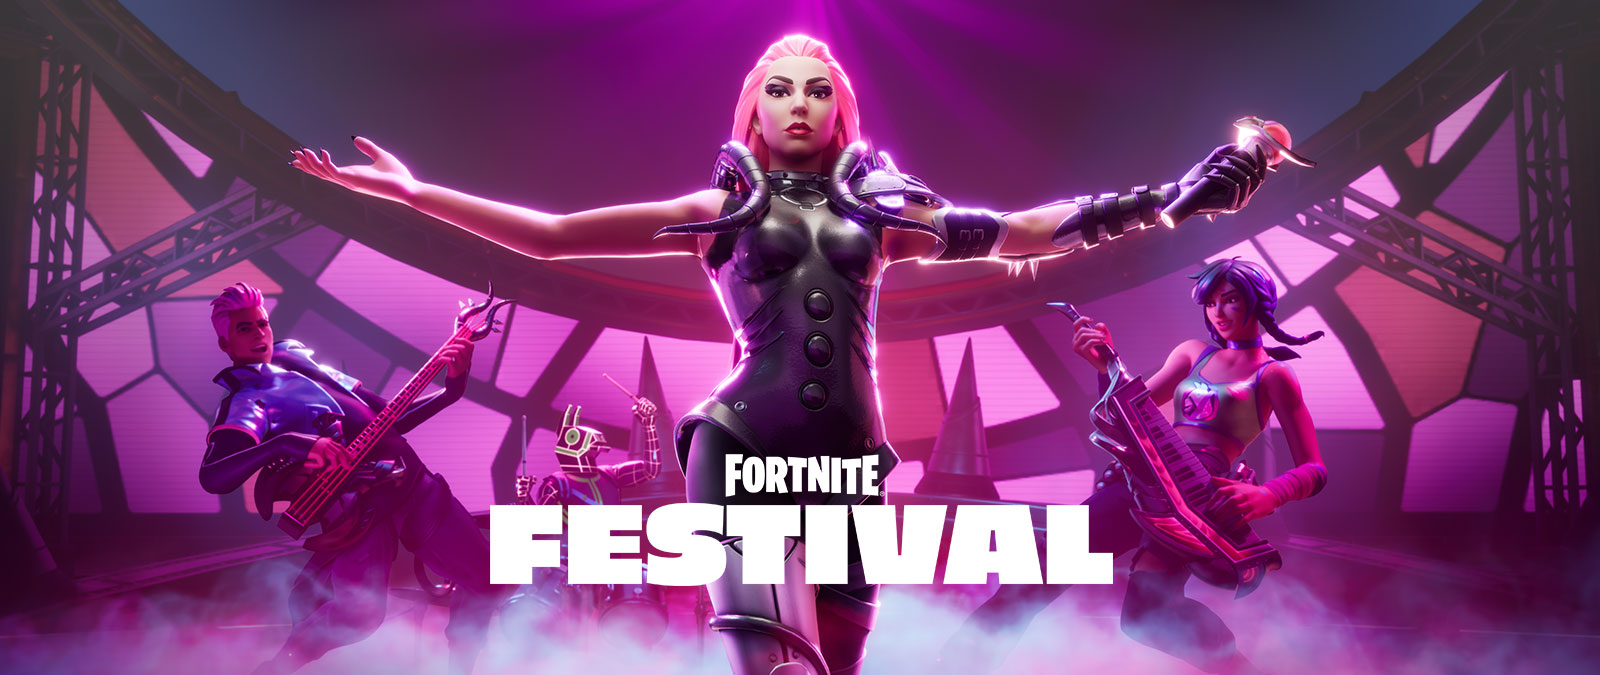 Lady Gaga stands center-stage, with the text Fortnite Festival at the bottom.